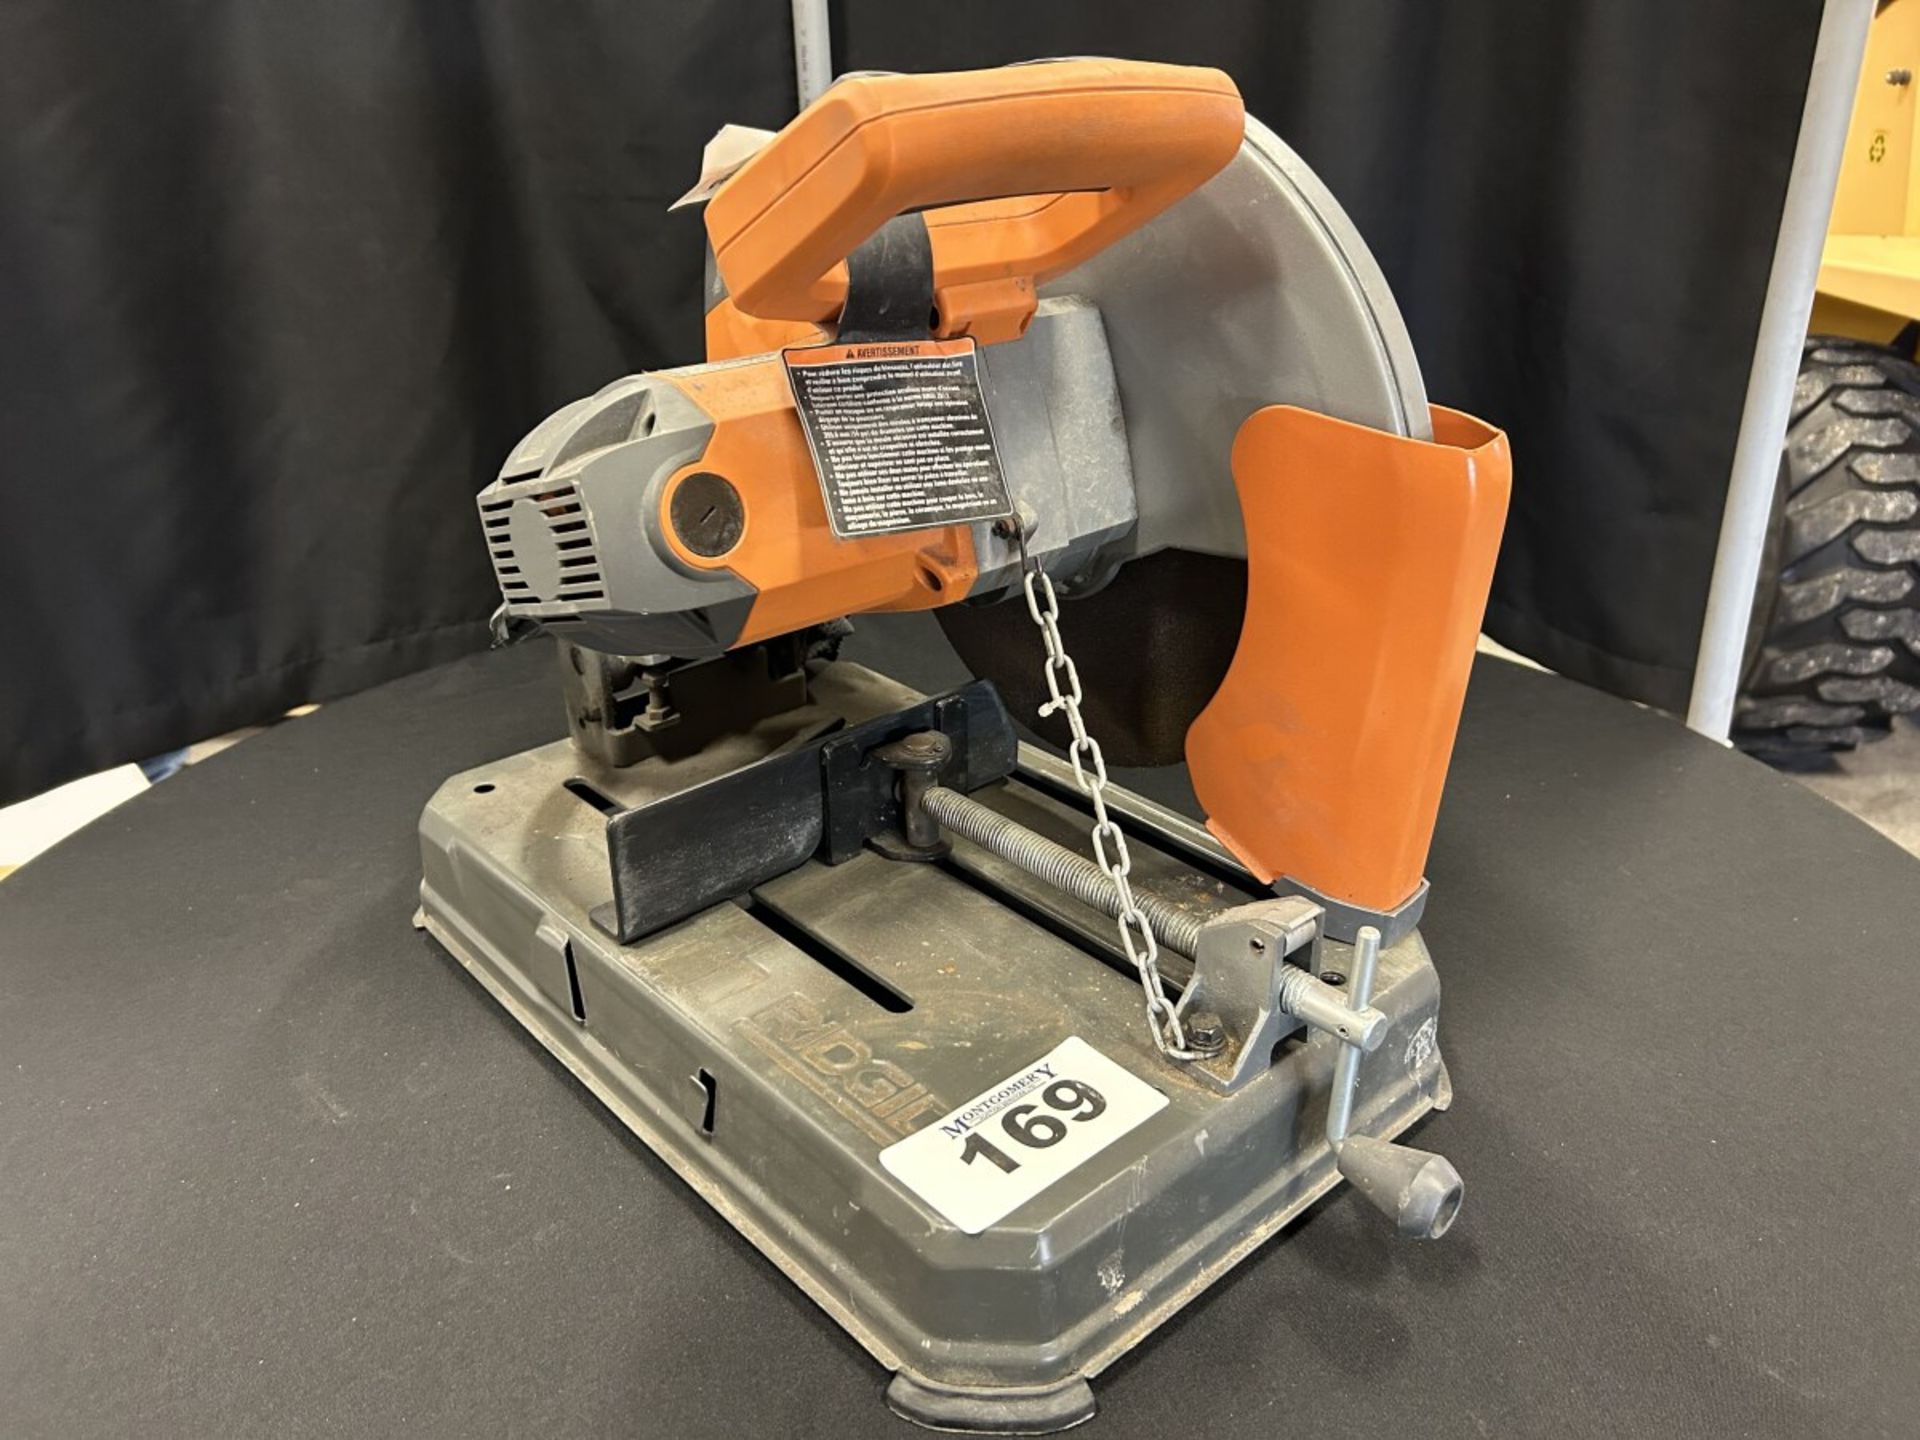 RIDGID 14IN CHOP SAW MODELR41422 - A27 - Image 2 of 4